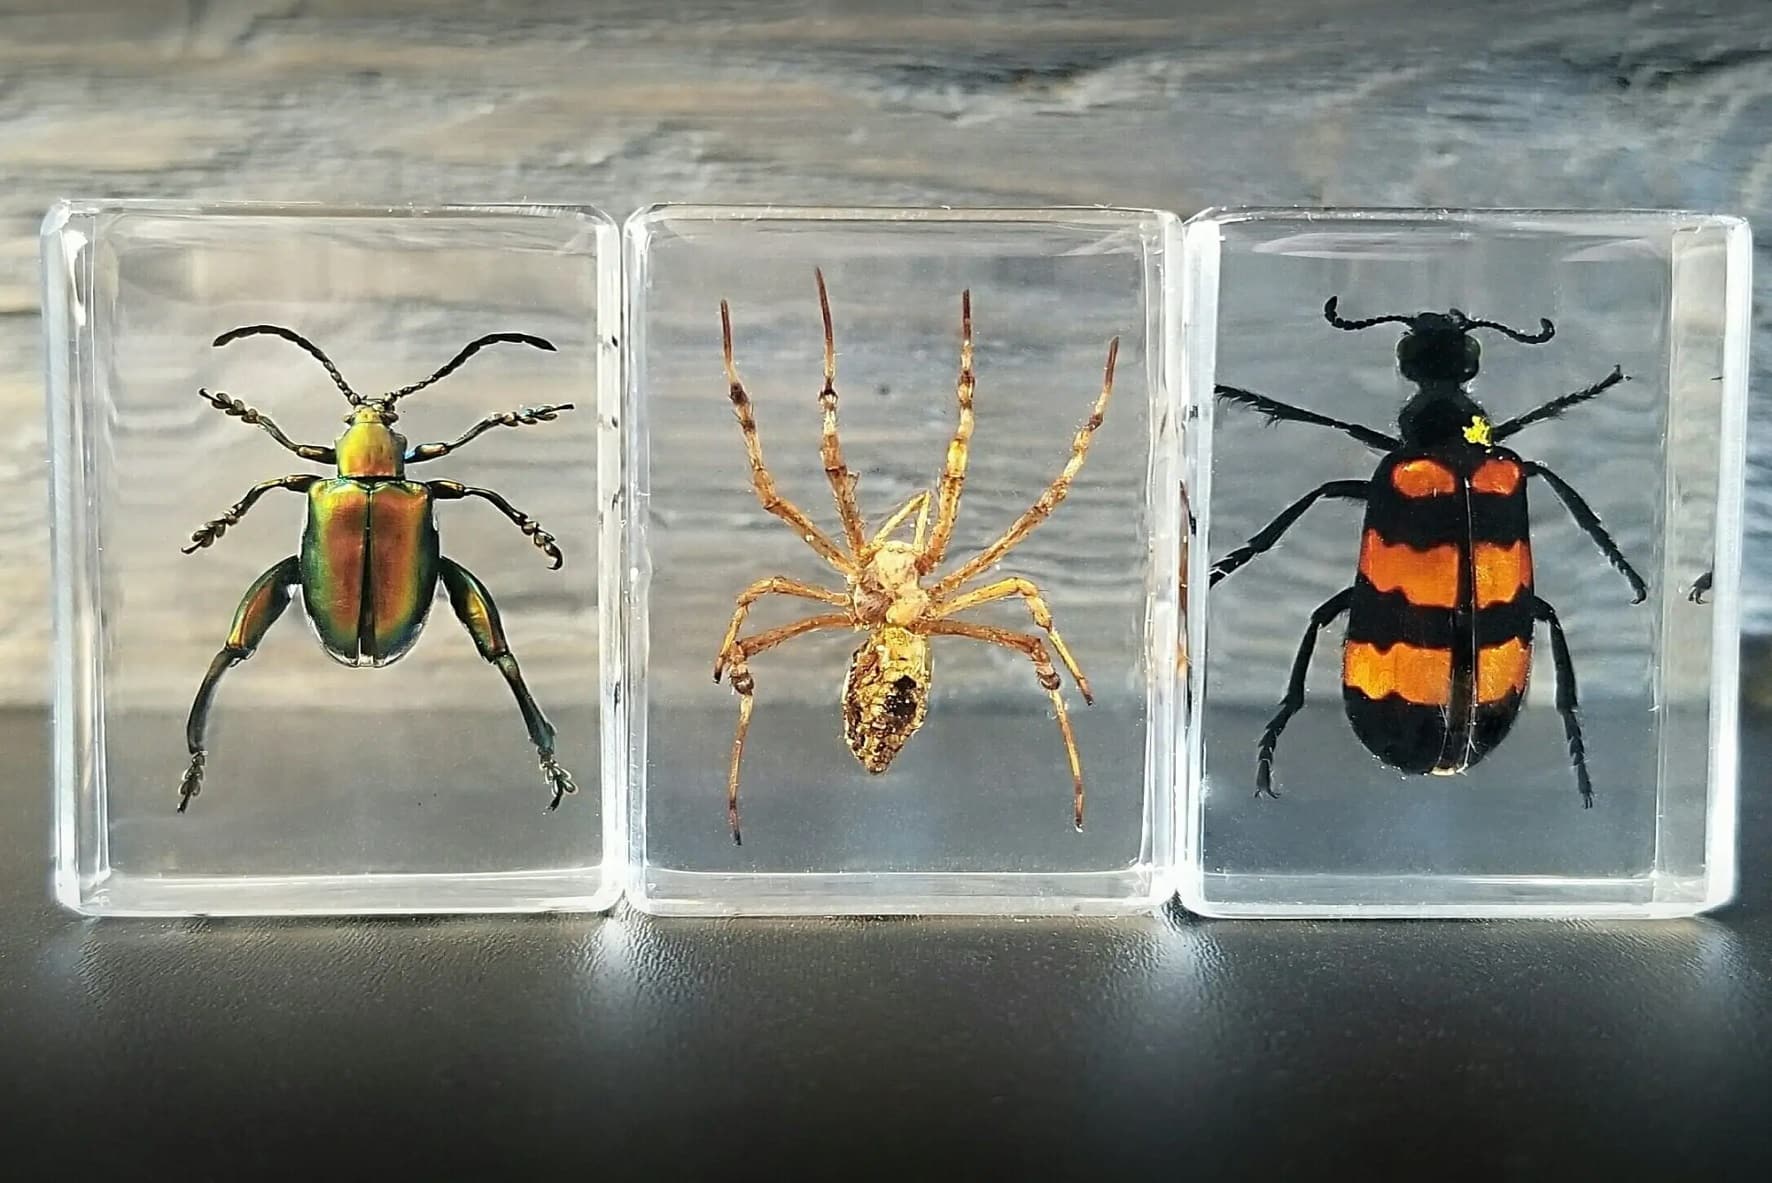 How to Make an Insect Collection